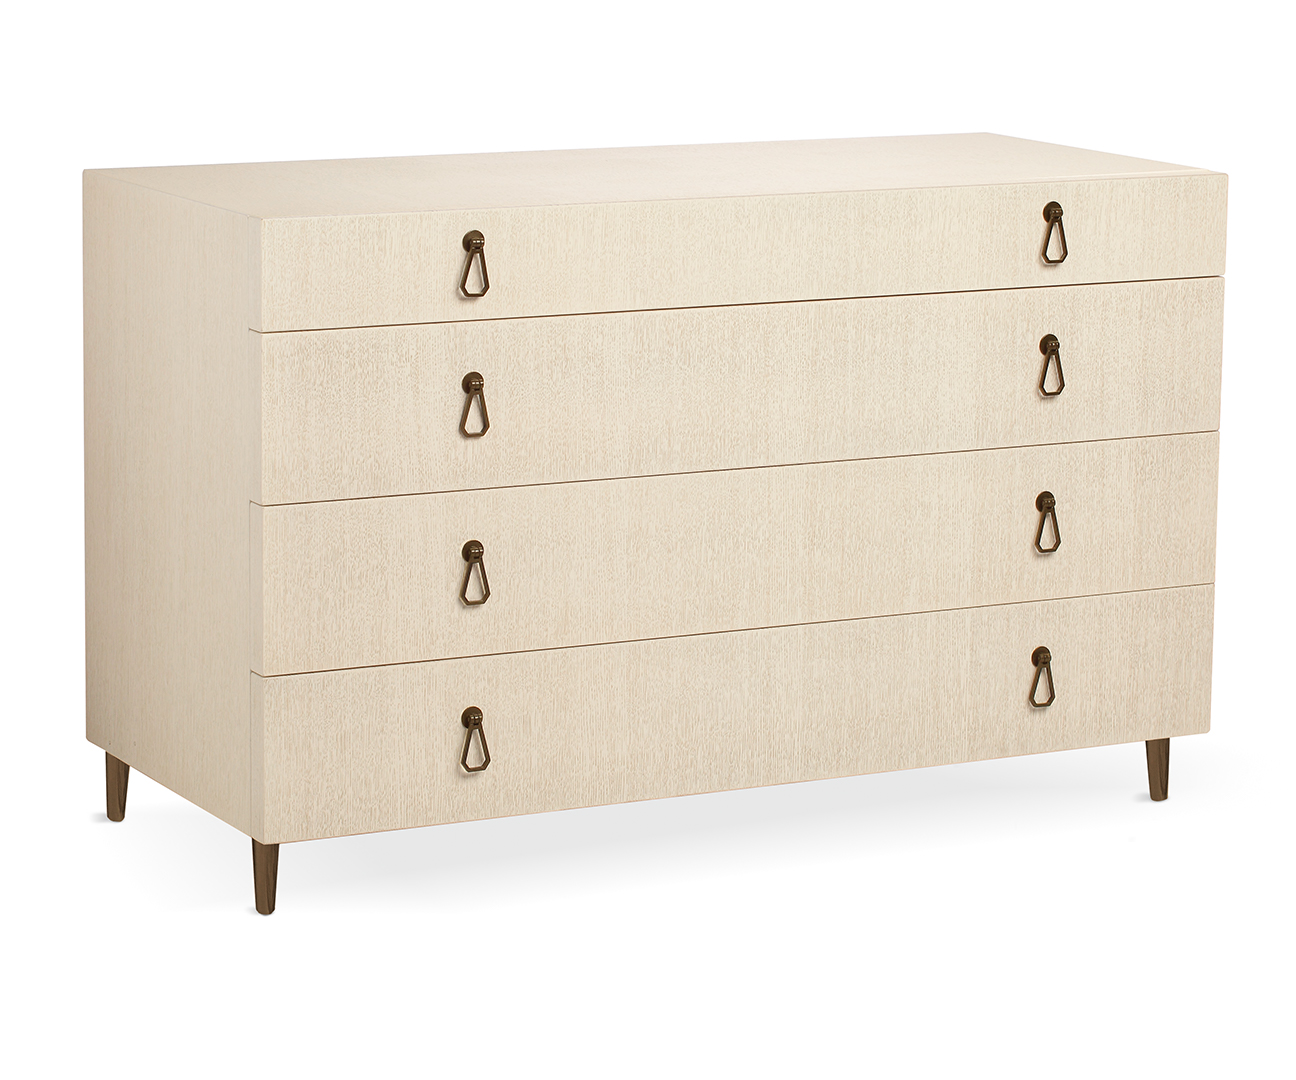 City chest of drawers (4 drawers) - Cantori